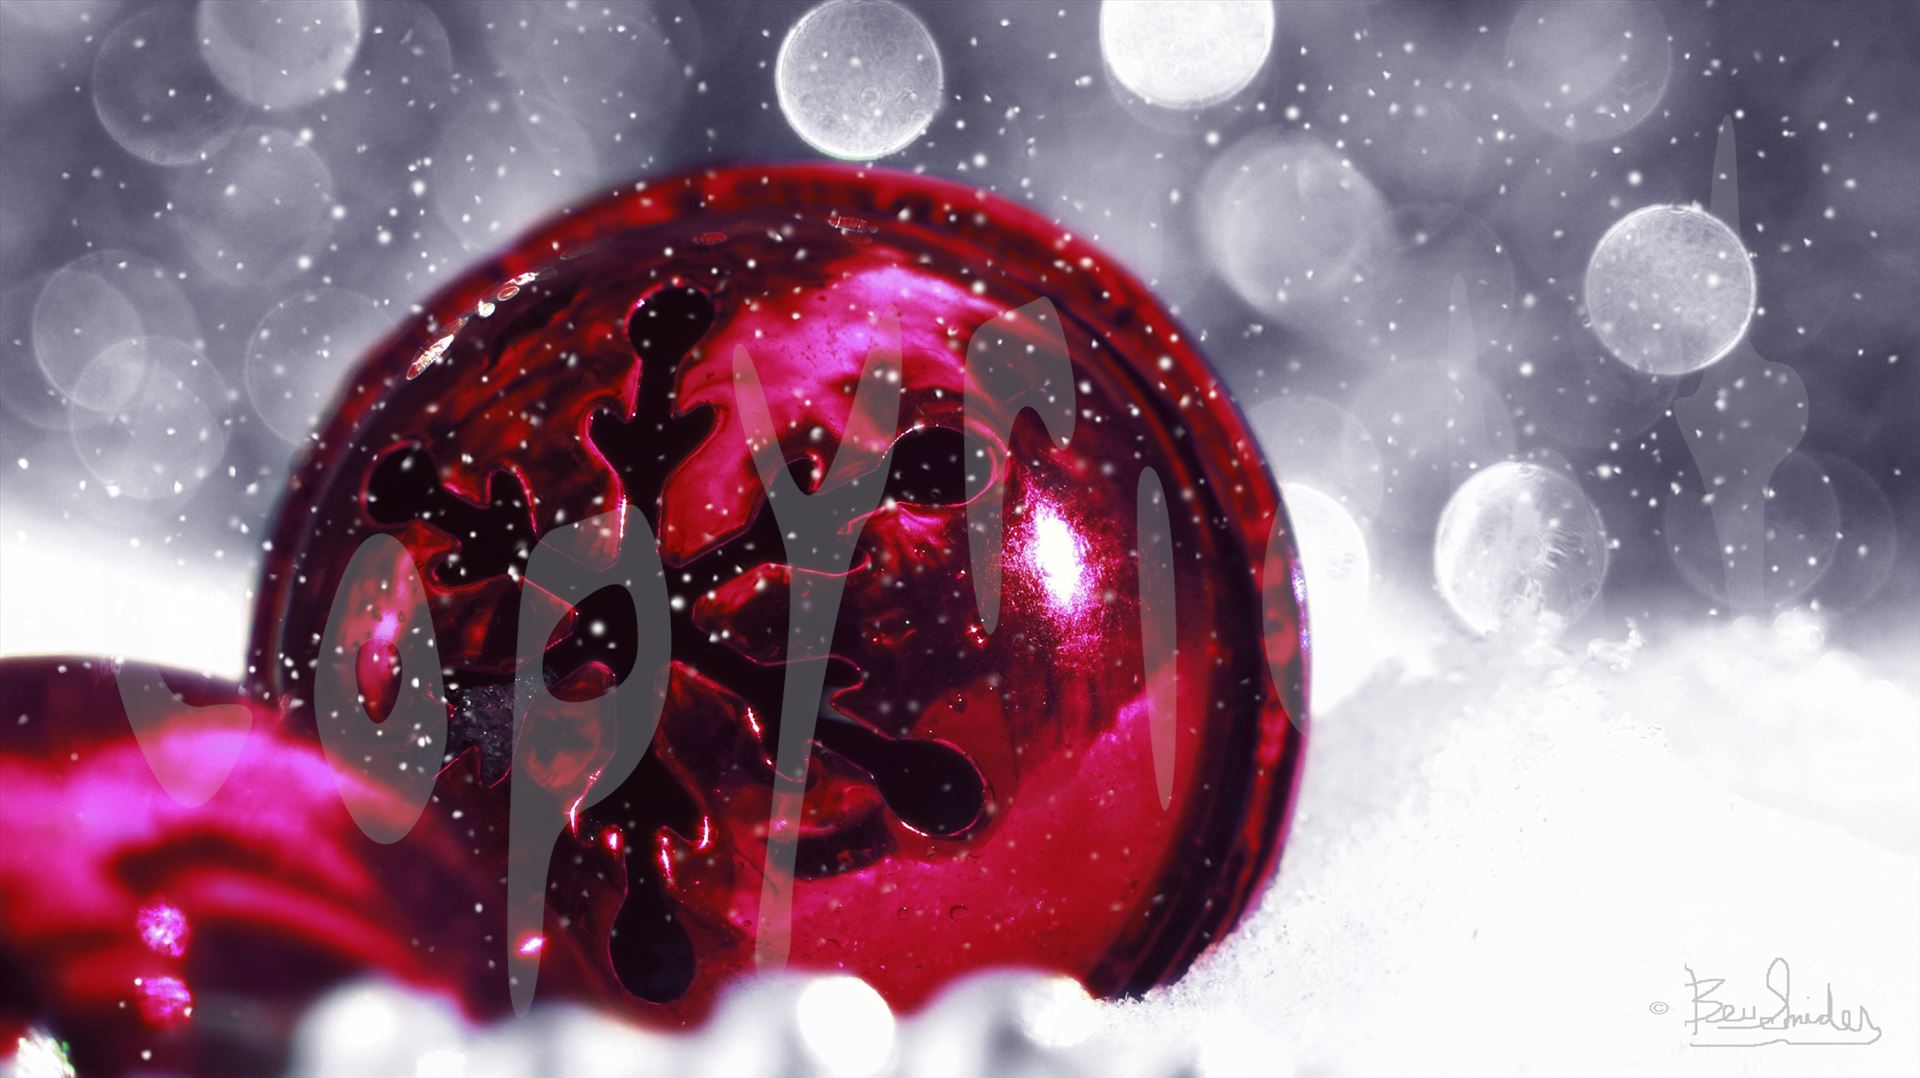 Fuschia Christmas Balls 6650 - Fuschia Christmas Balls in the snow with bokeh background by Snookies Place of Wildlife and Nature